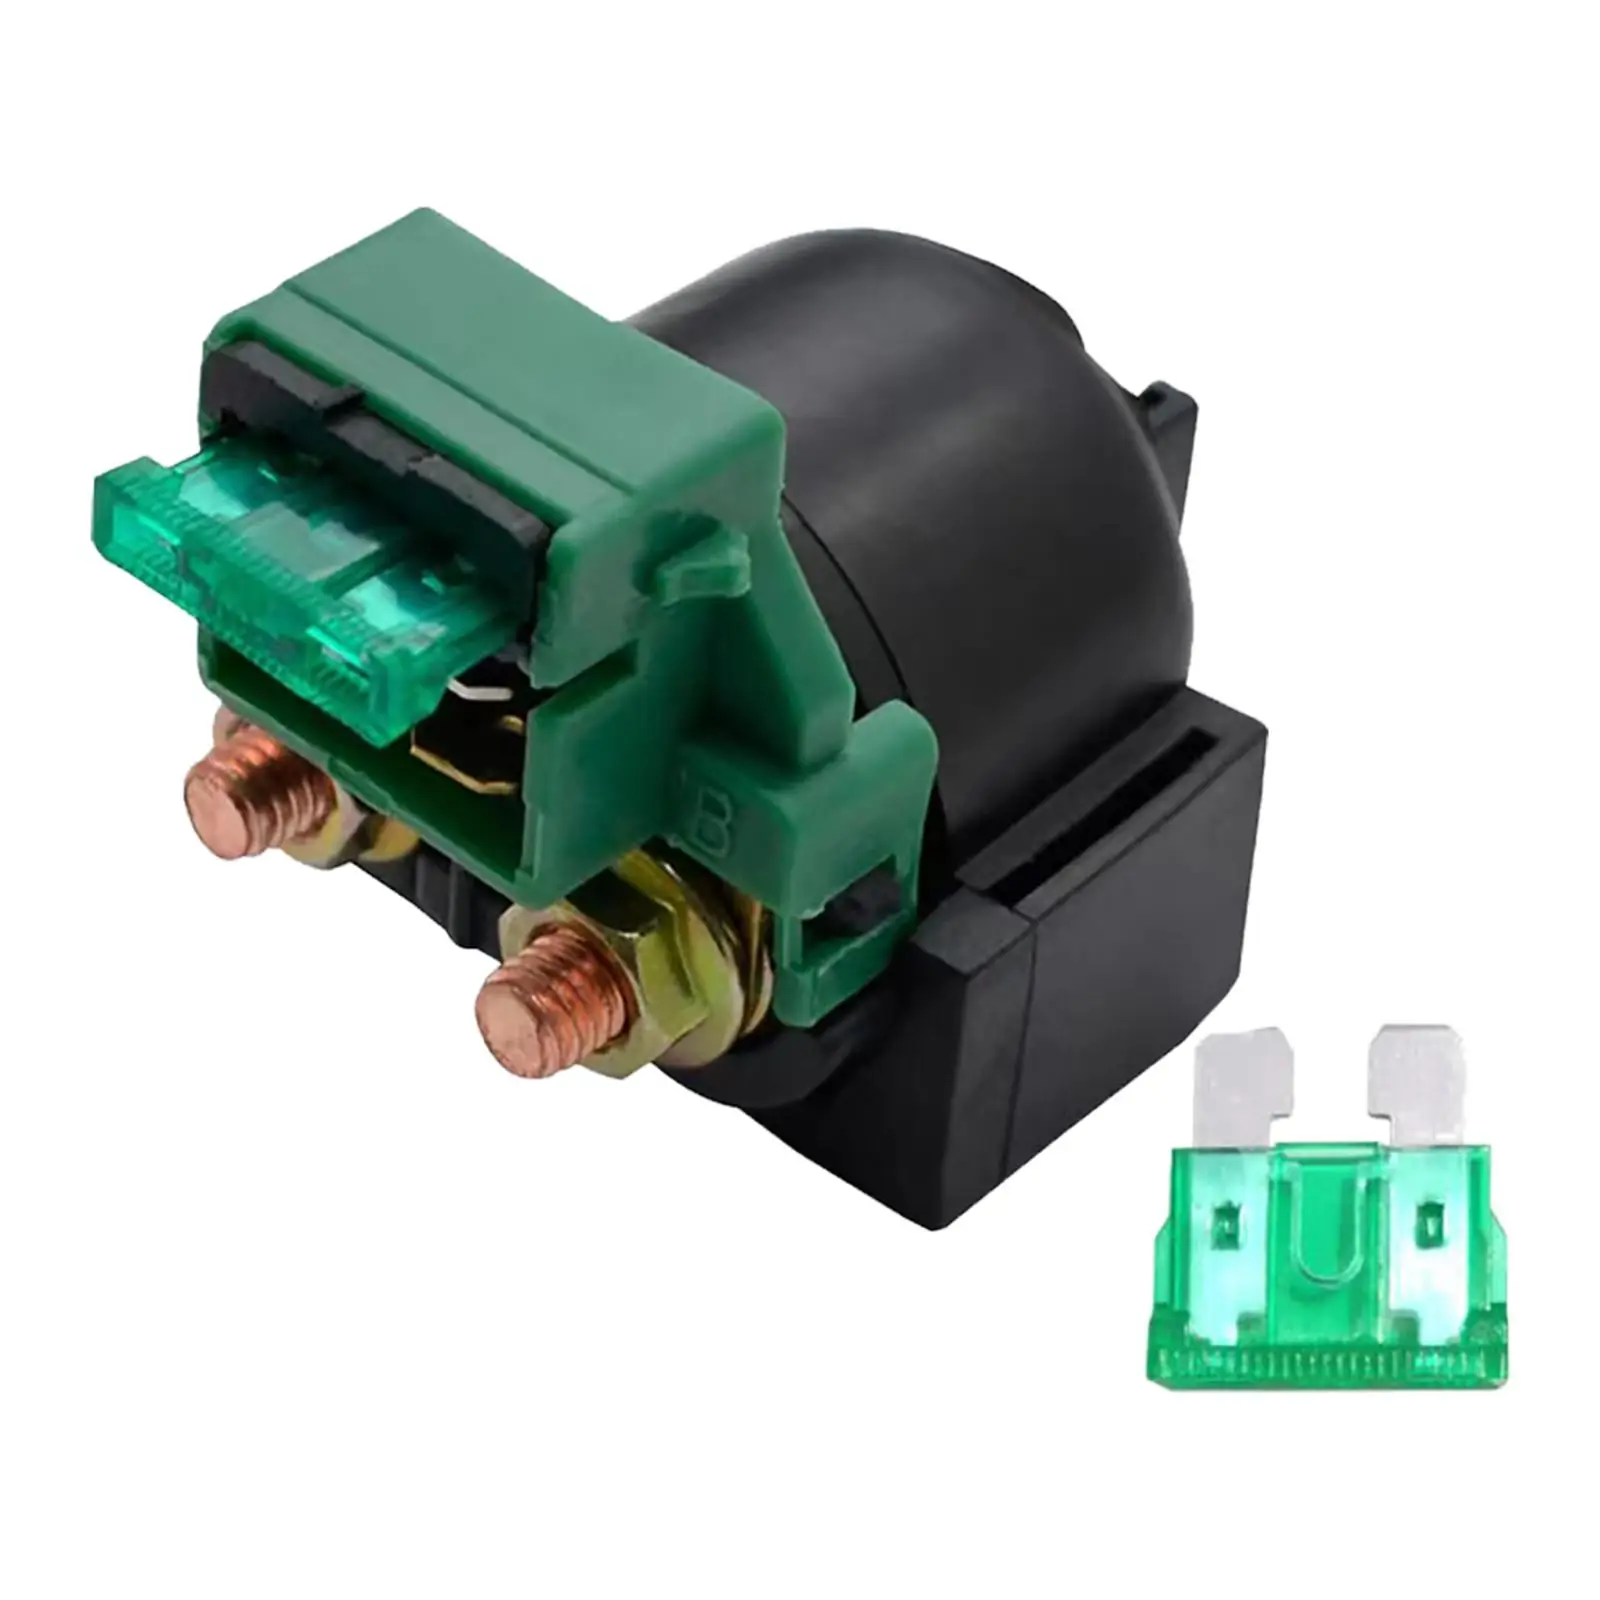 Starter Motor Solenoid Relay Green Electrical Relay Switch for Suzuki GS500 1990-09 Gw250 GSX250R DL250 Motorcycle Parts